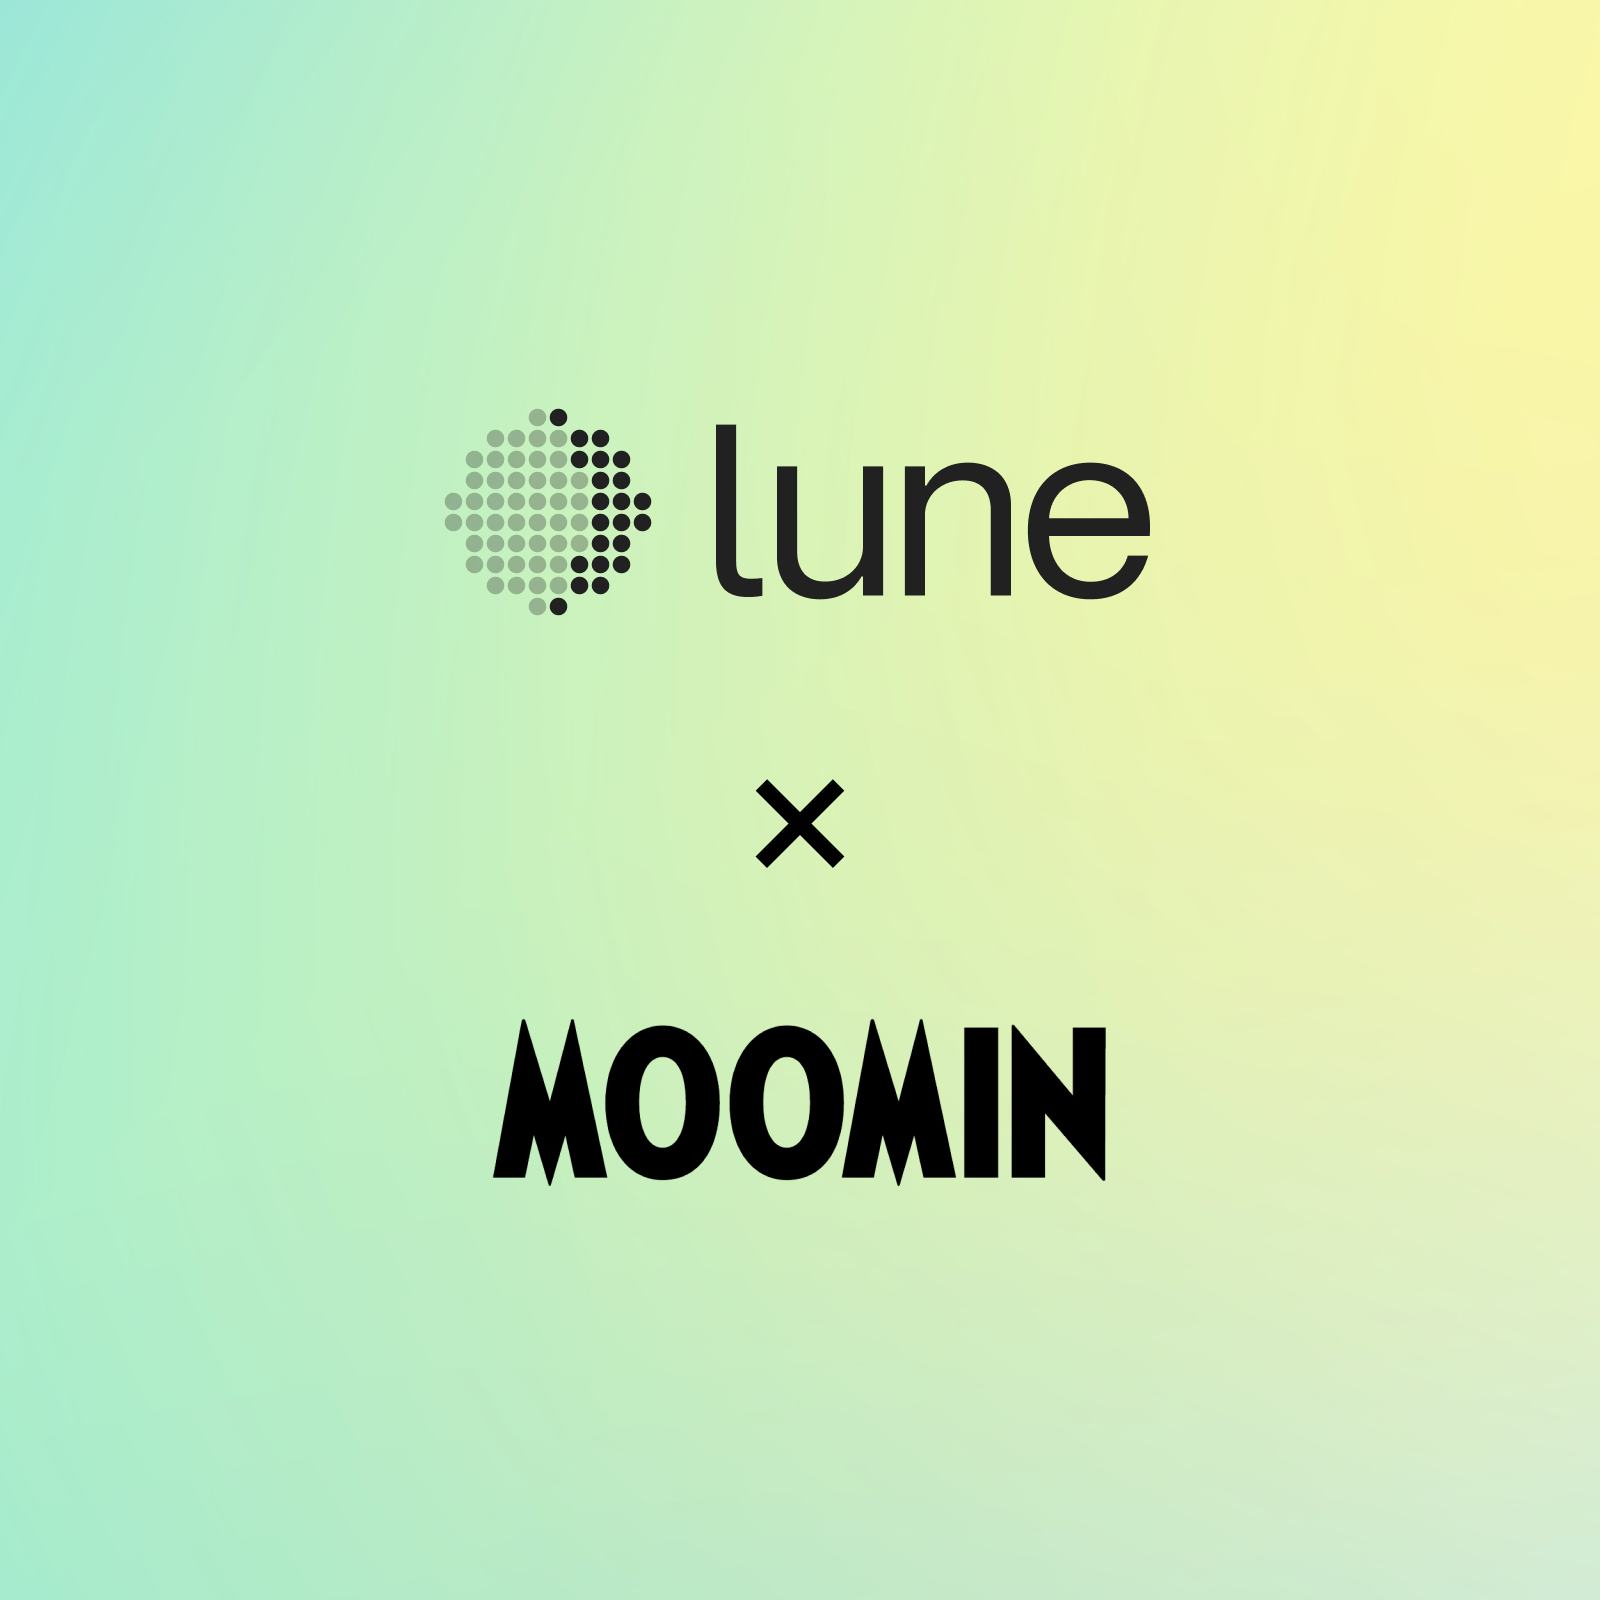 Moomin partners with Lune for high-quality offsetting